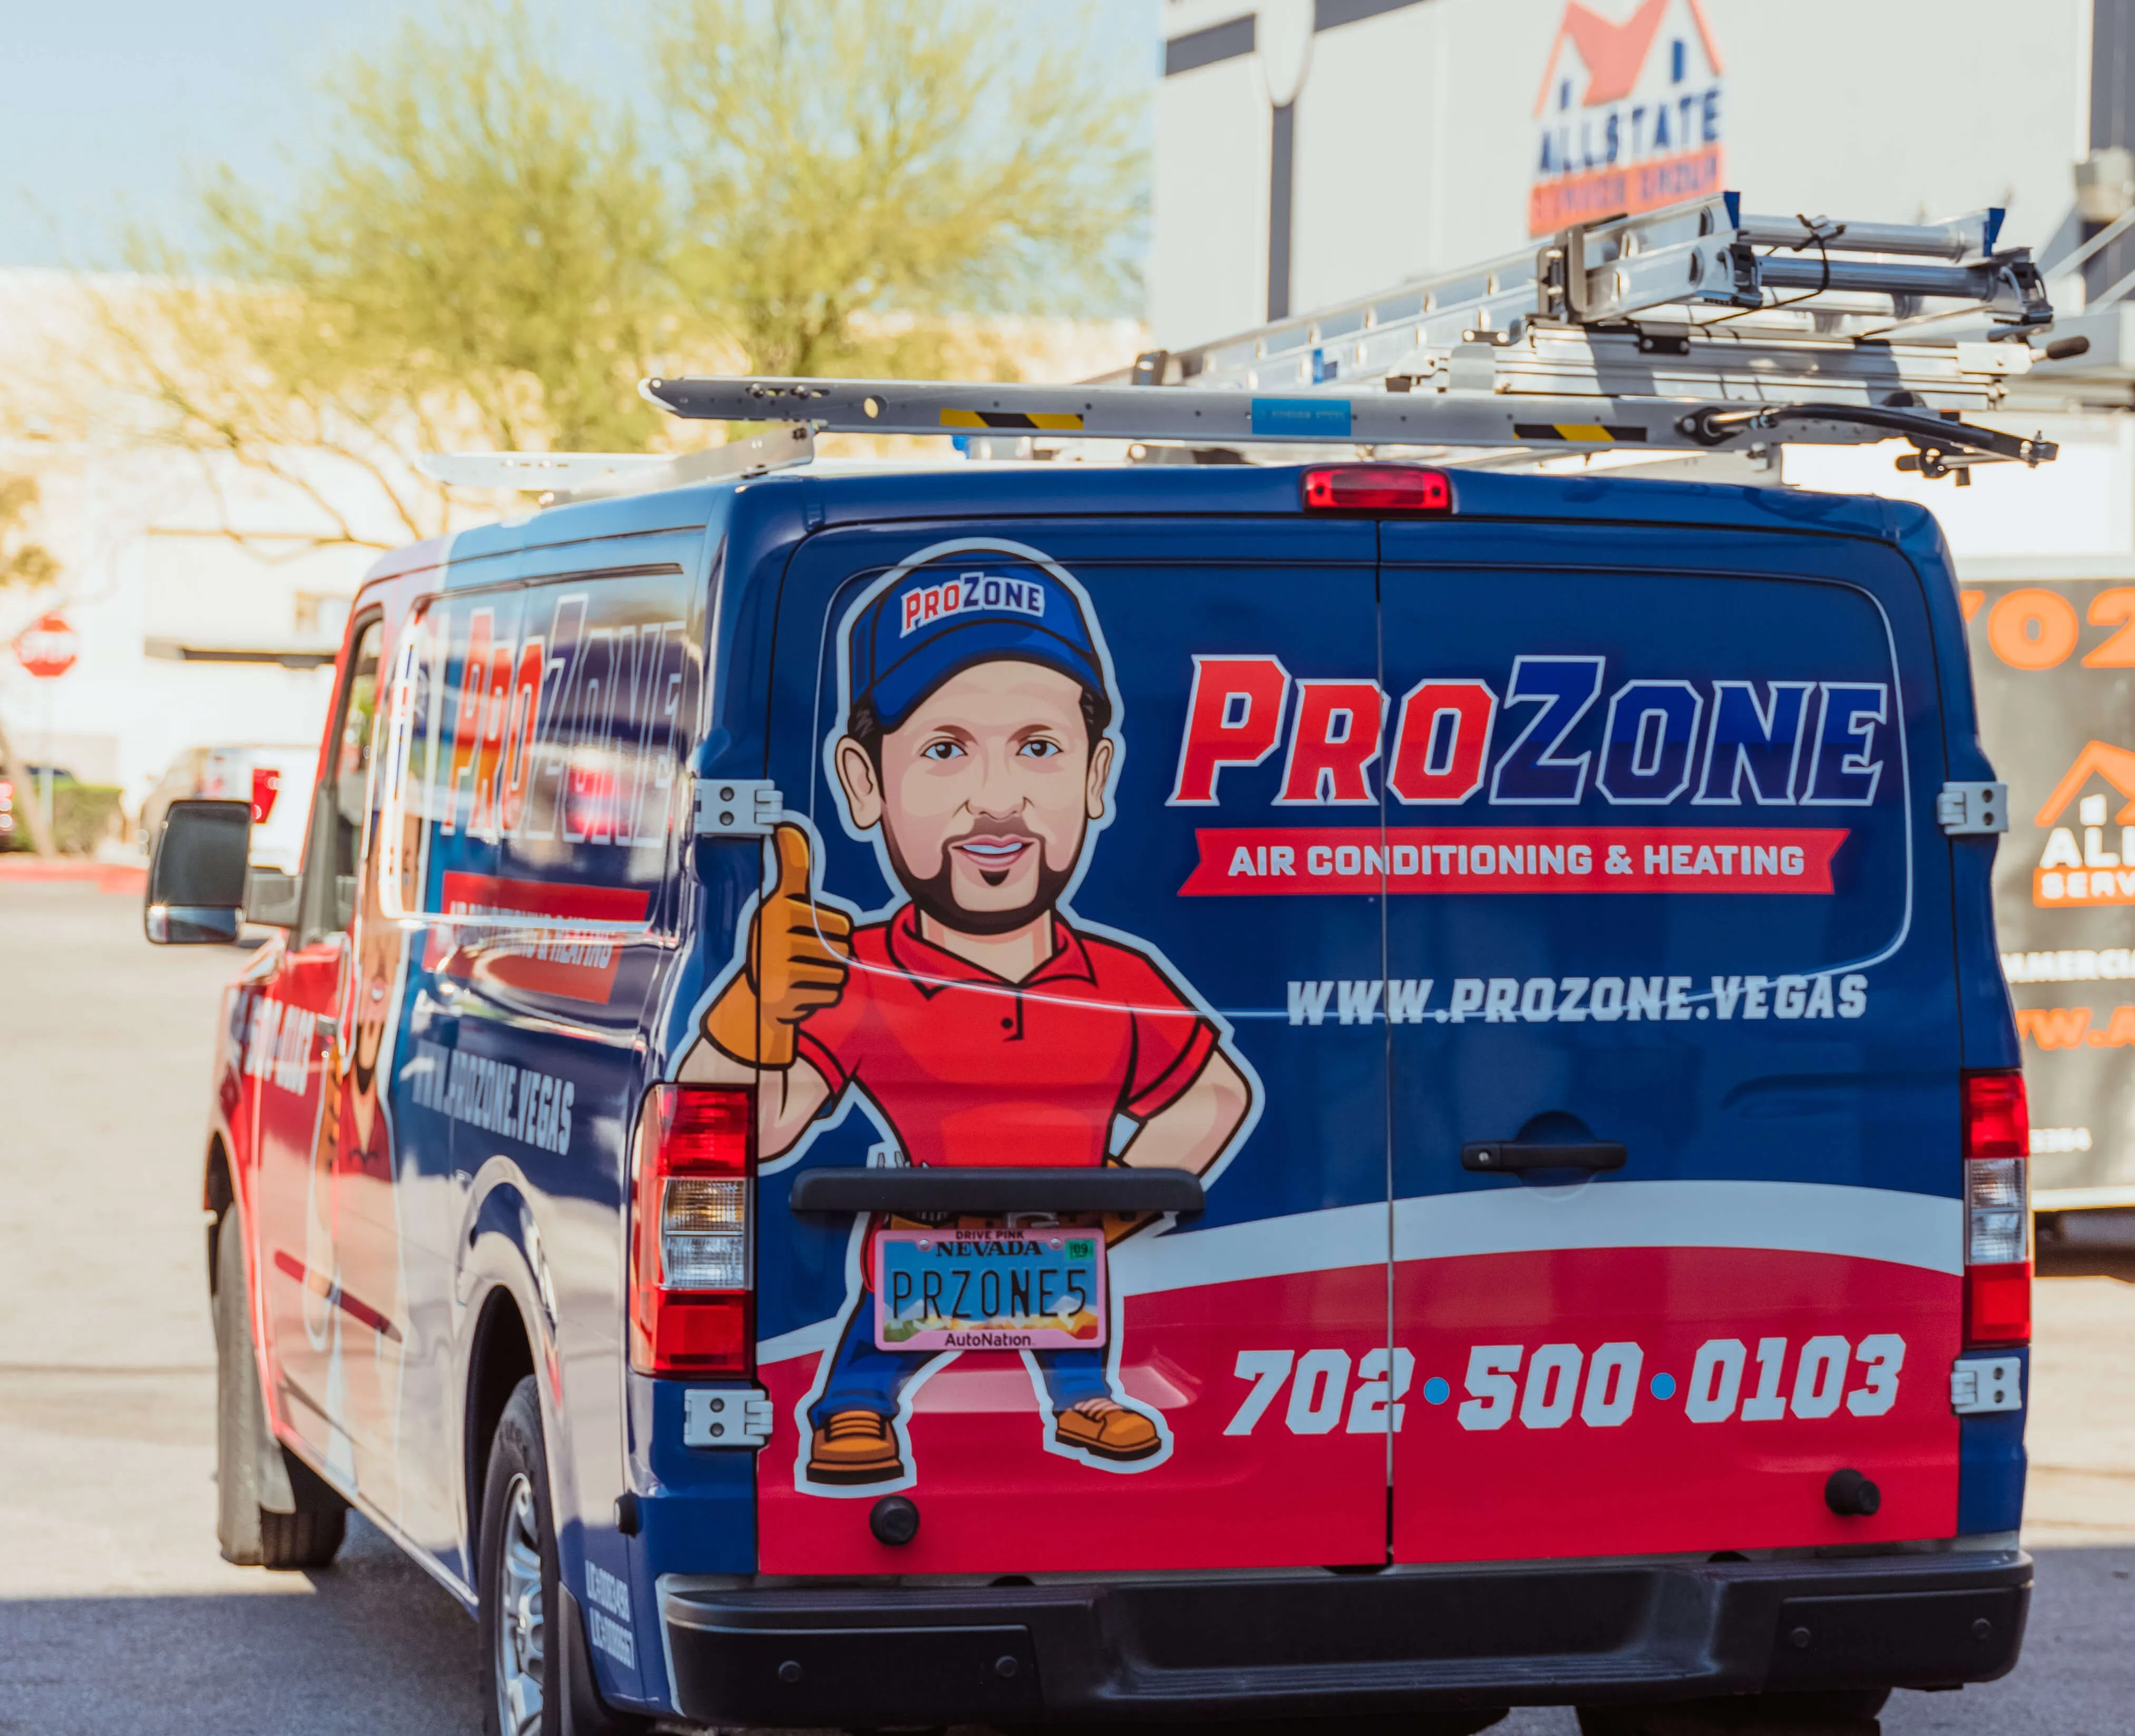 Air Conditioning Repair Service in Las Vegas - ProZone Air Conditioning And Heating